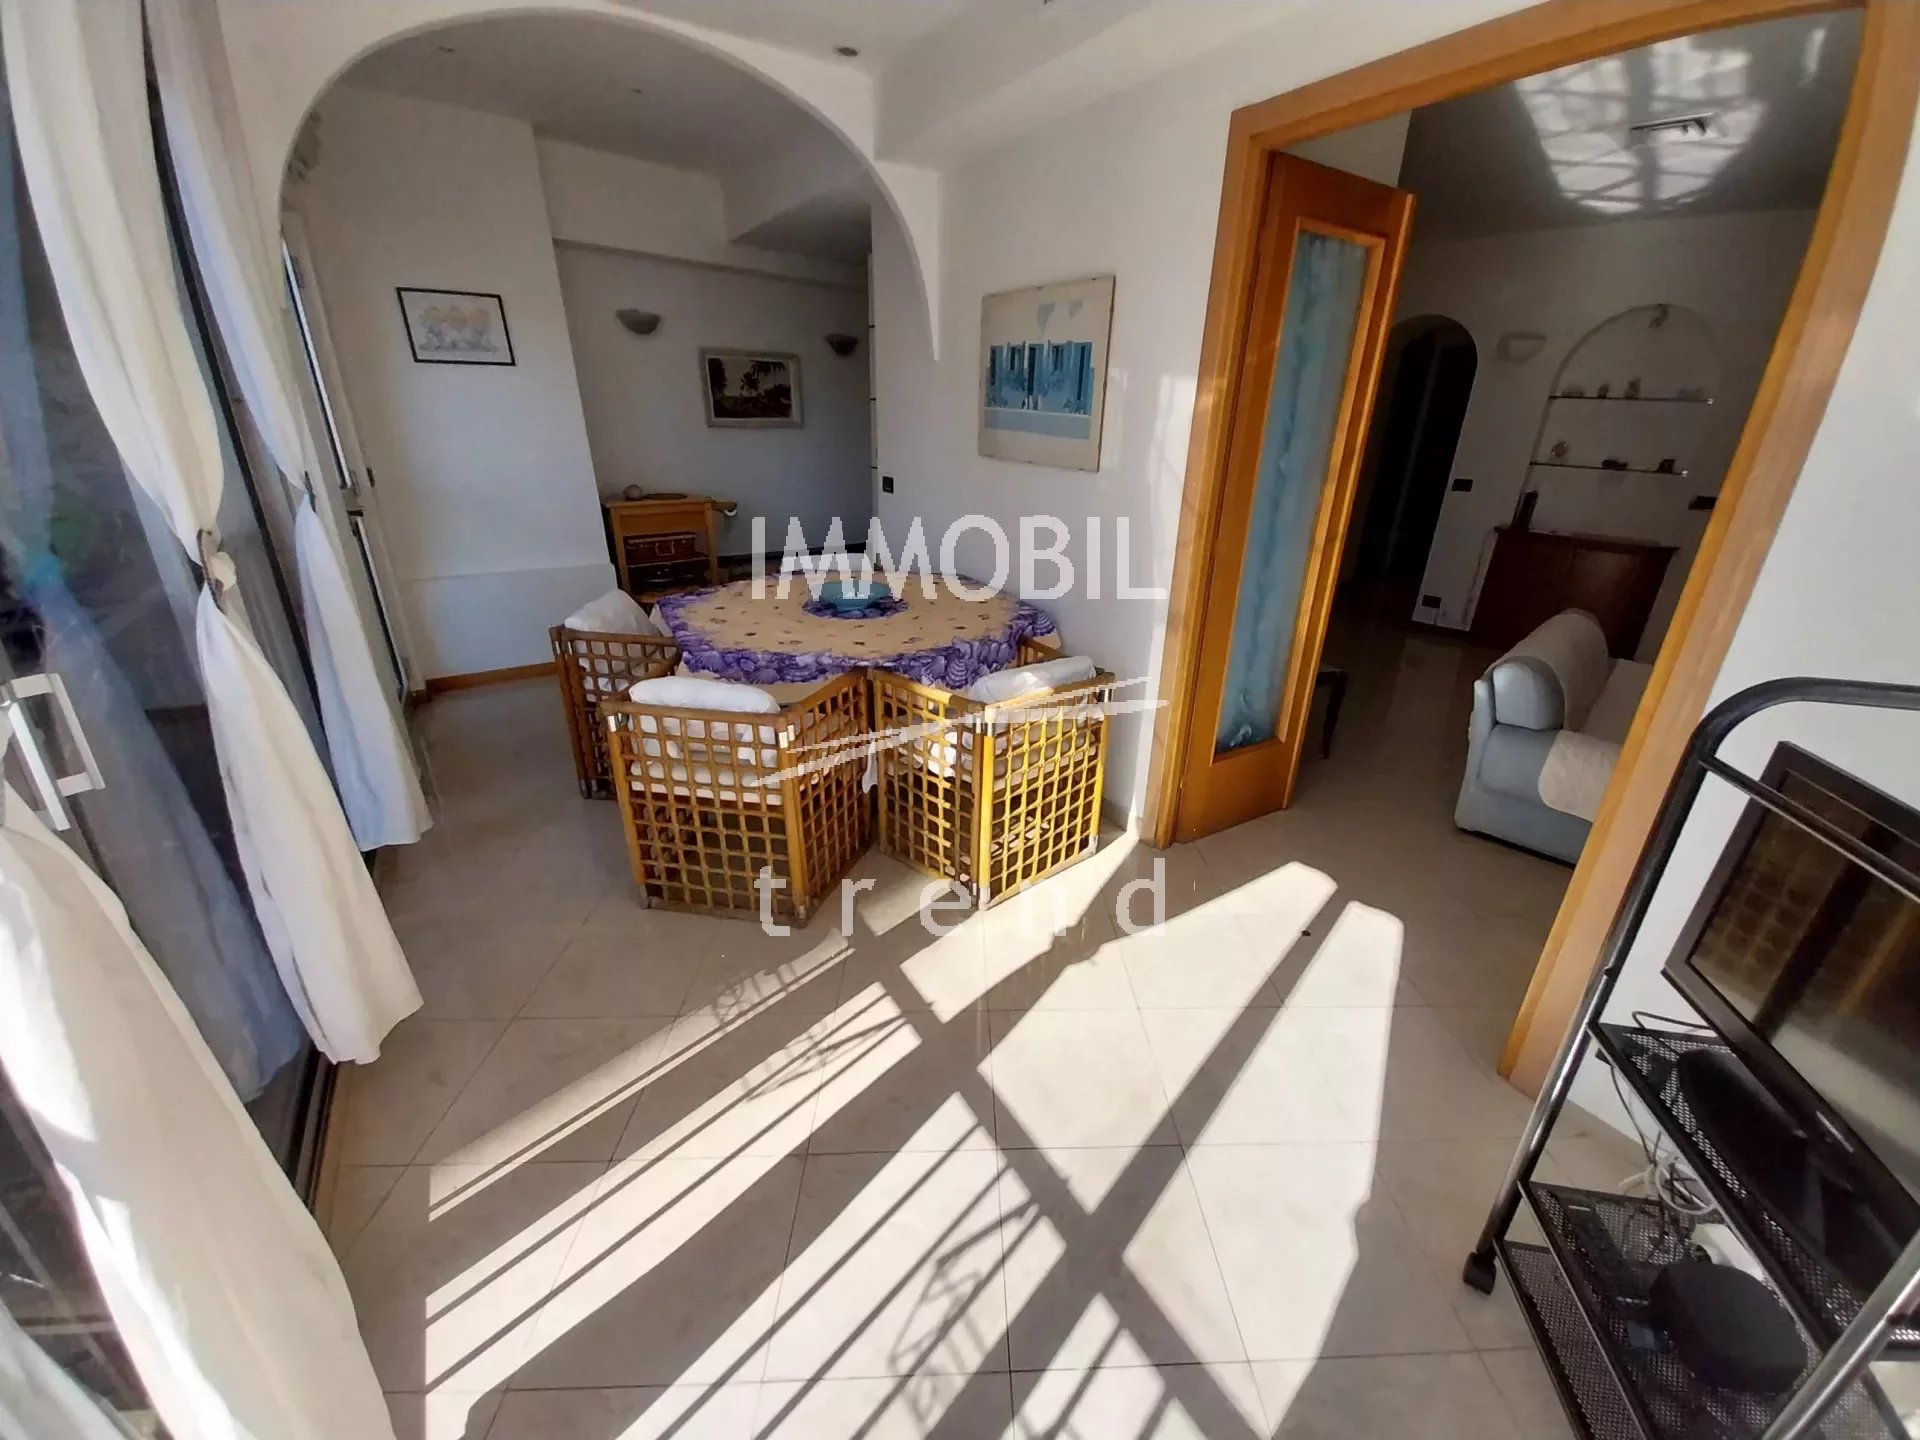 SOLE AGENCY - MENTON OLD TOWN - Charming large two bedroom apartment with panoramic sea view